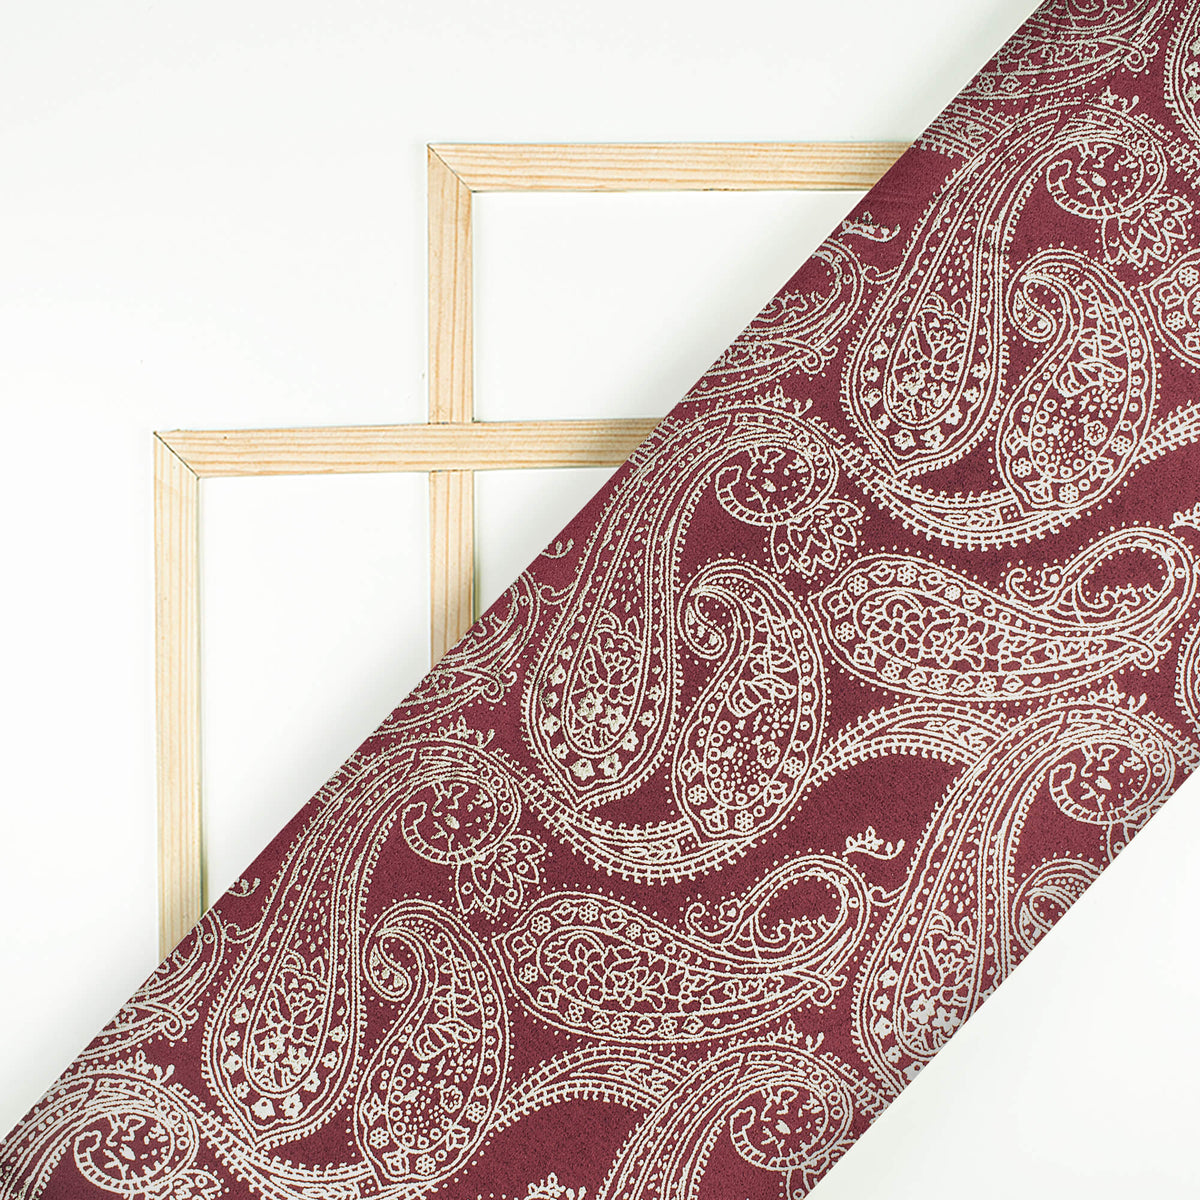 Maroon Paisley Pattern Golden Foil Print Butter Silk Satin Fabric (Width 56 Inches)